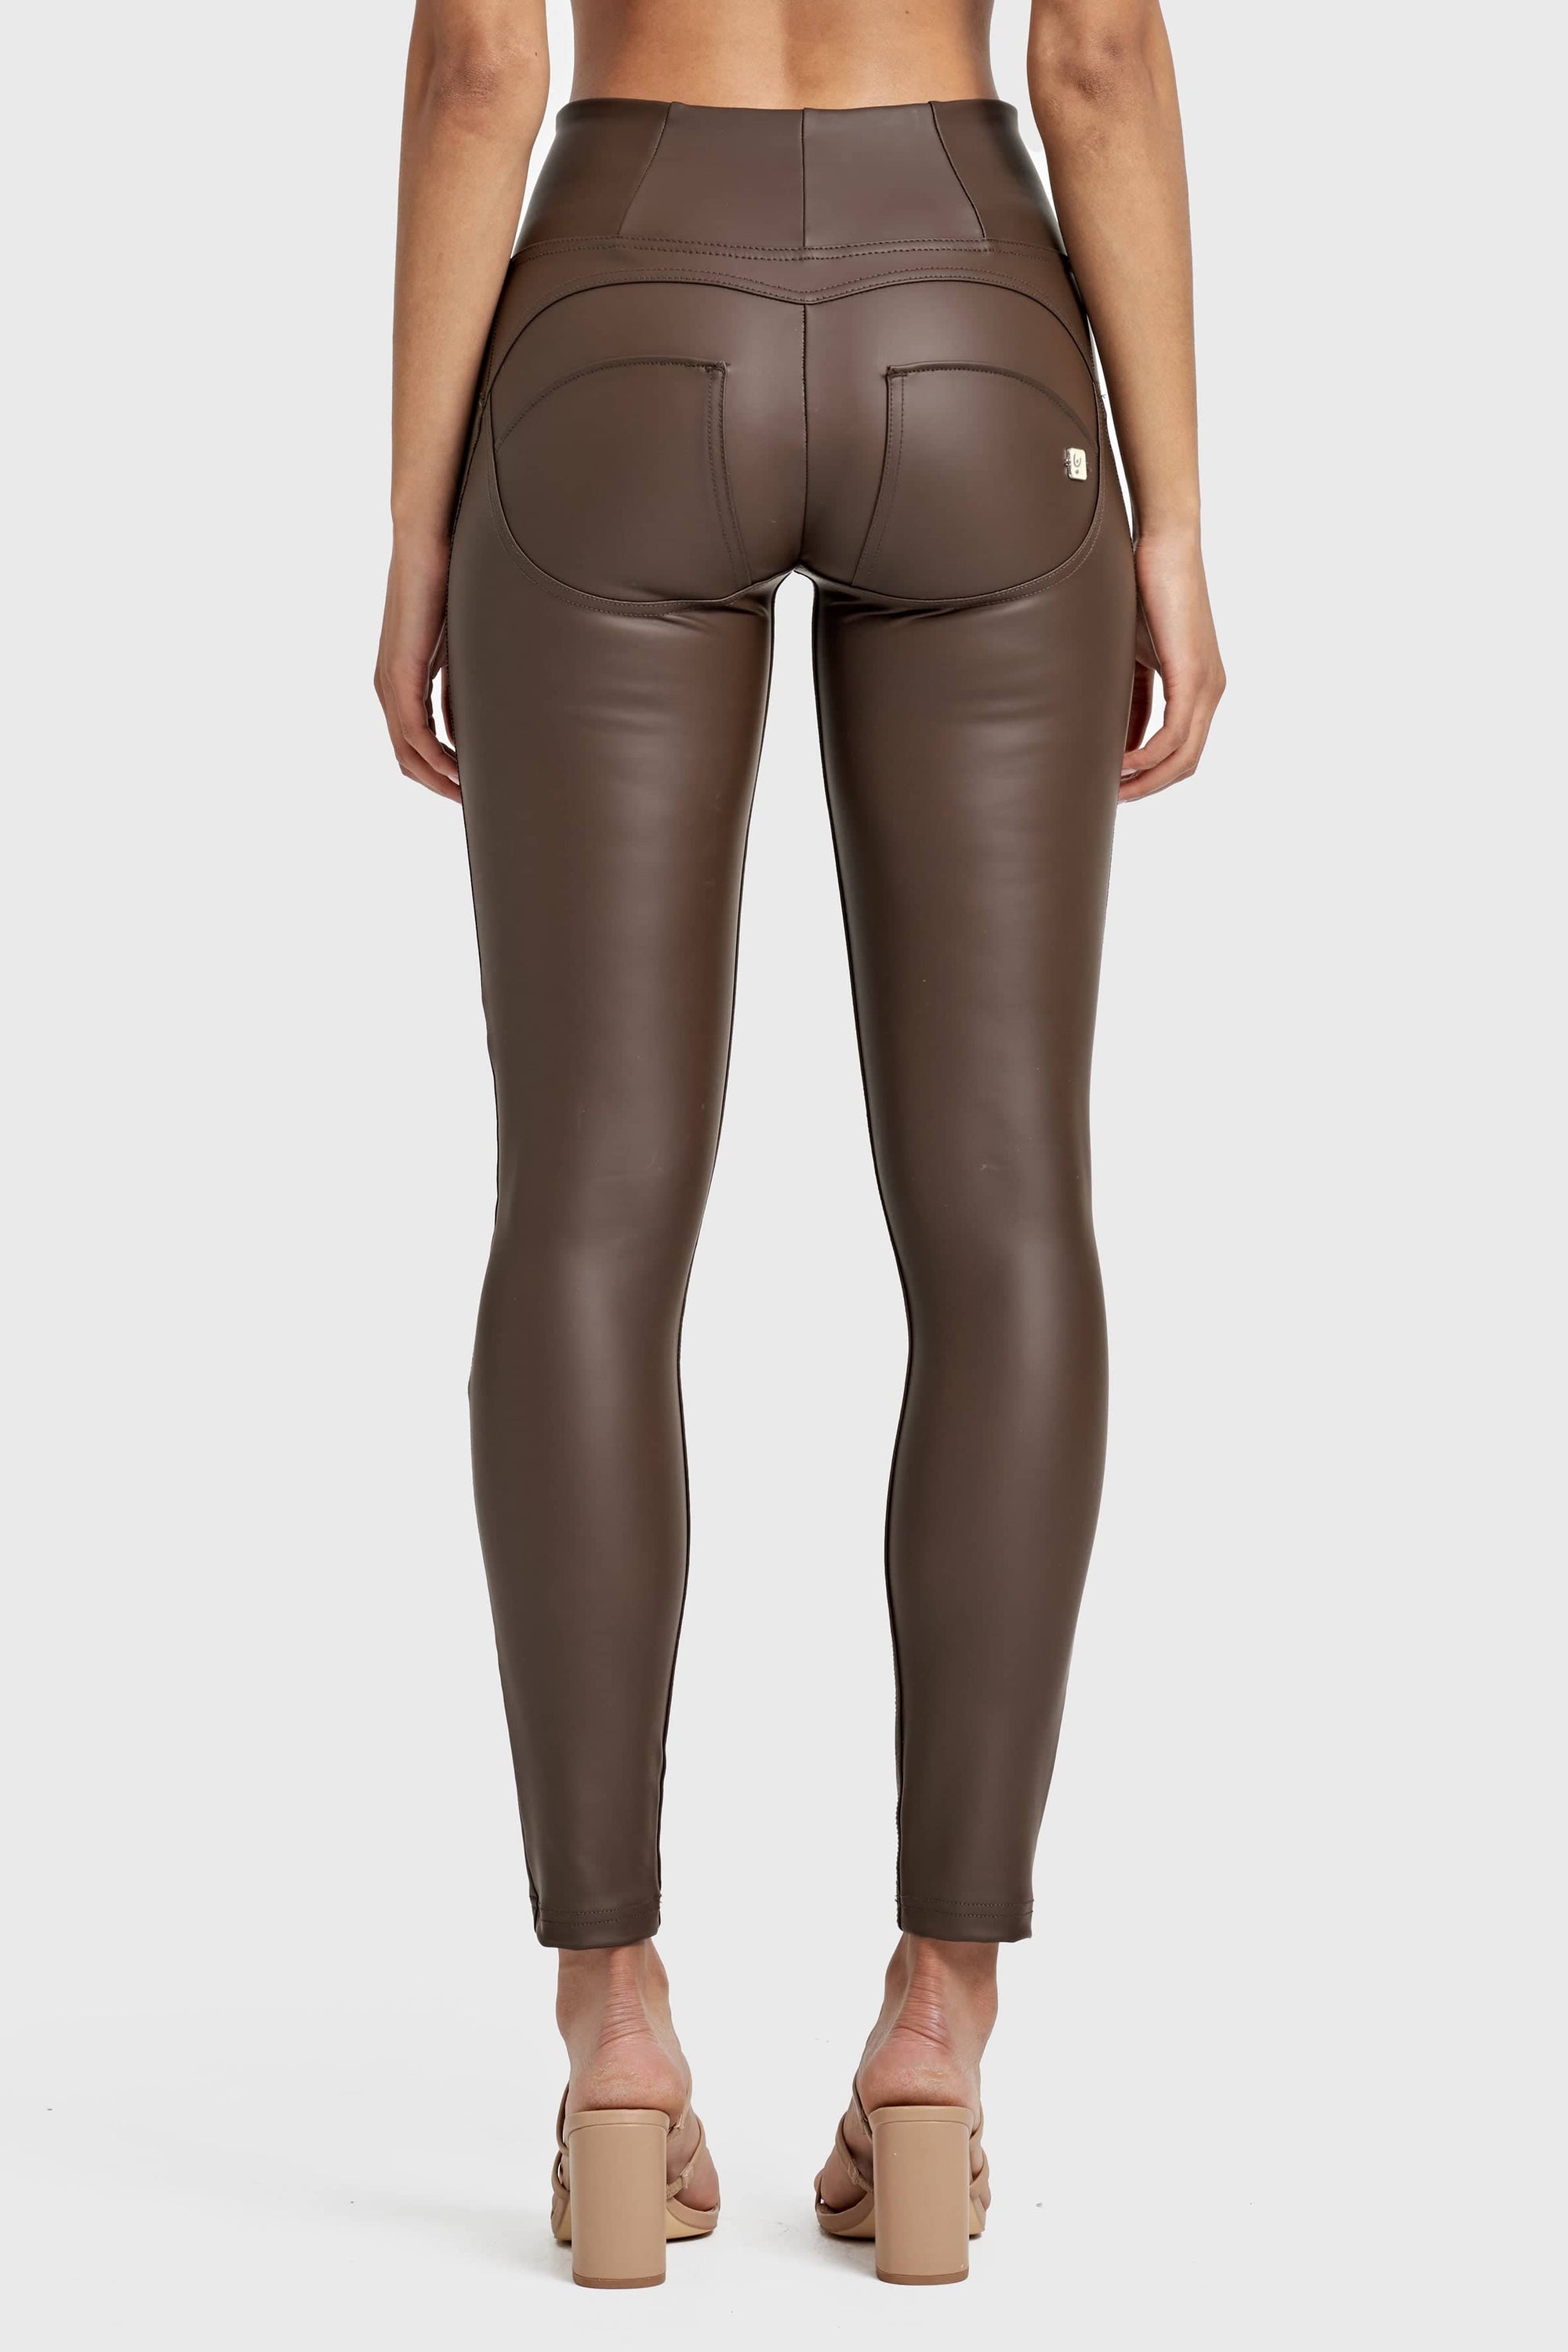 WR.UP® Faux Leather - High Waisted - Petite Length - Chocolate 8